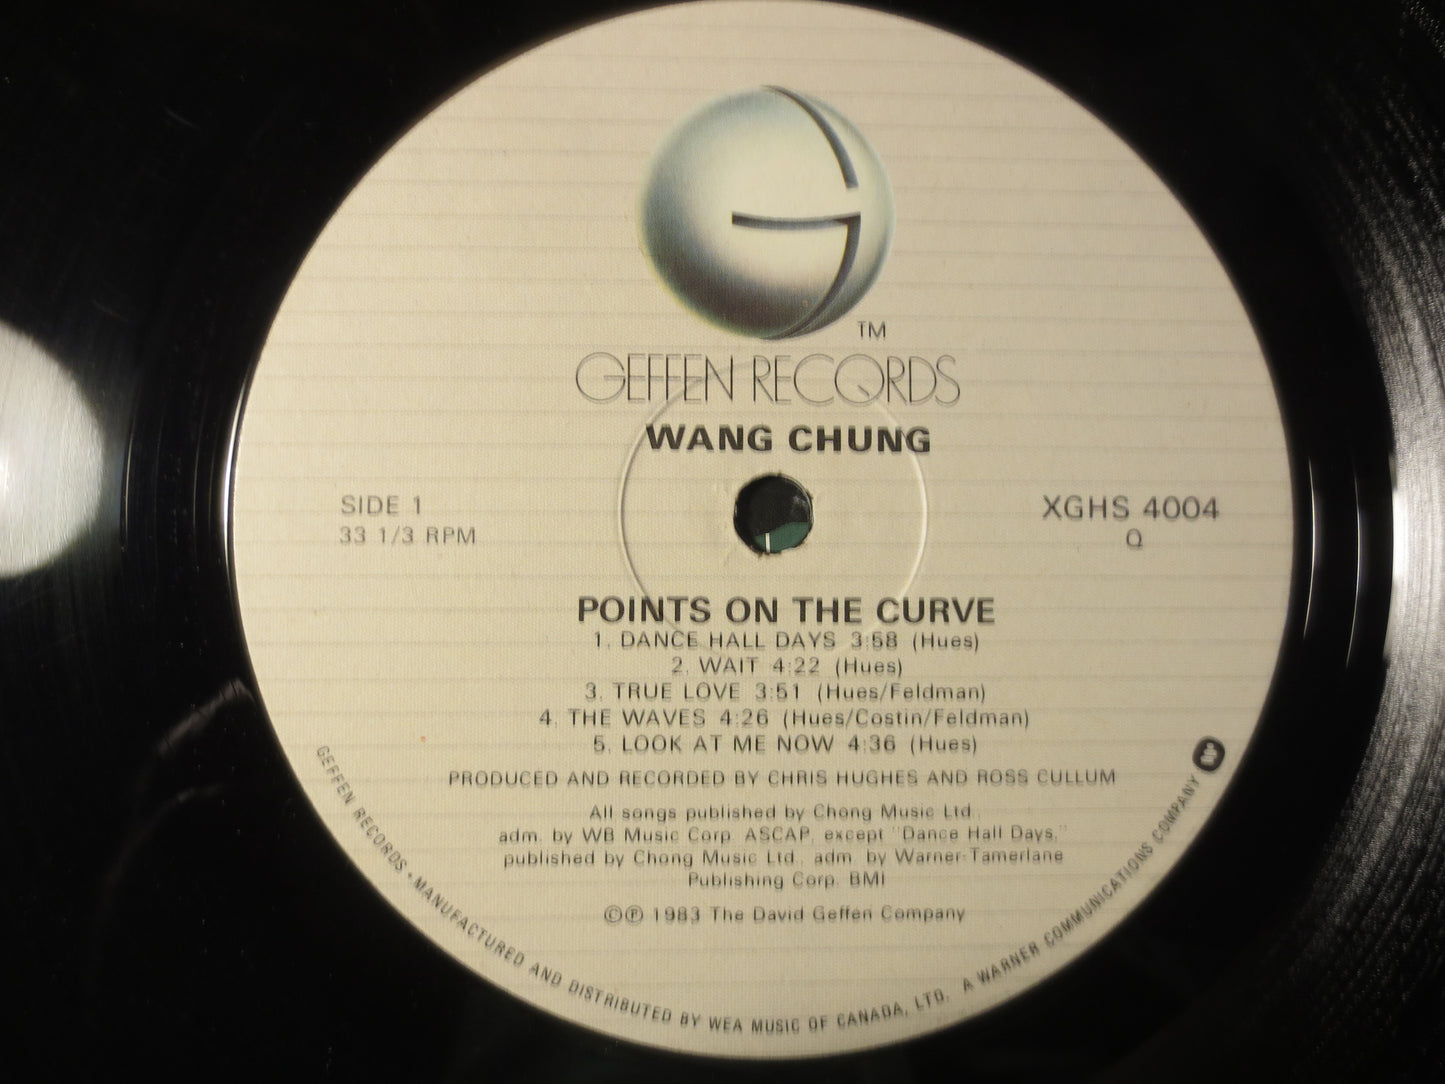 WANG CHUNG Record, POINTS On The Curve, Wang Chung Vinyl, Wang Chung Albums, Wang Chung Lp, Vintage Vinyl, 1983 Records